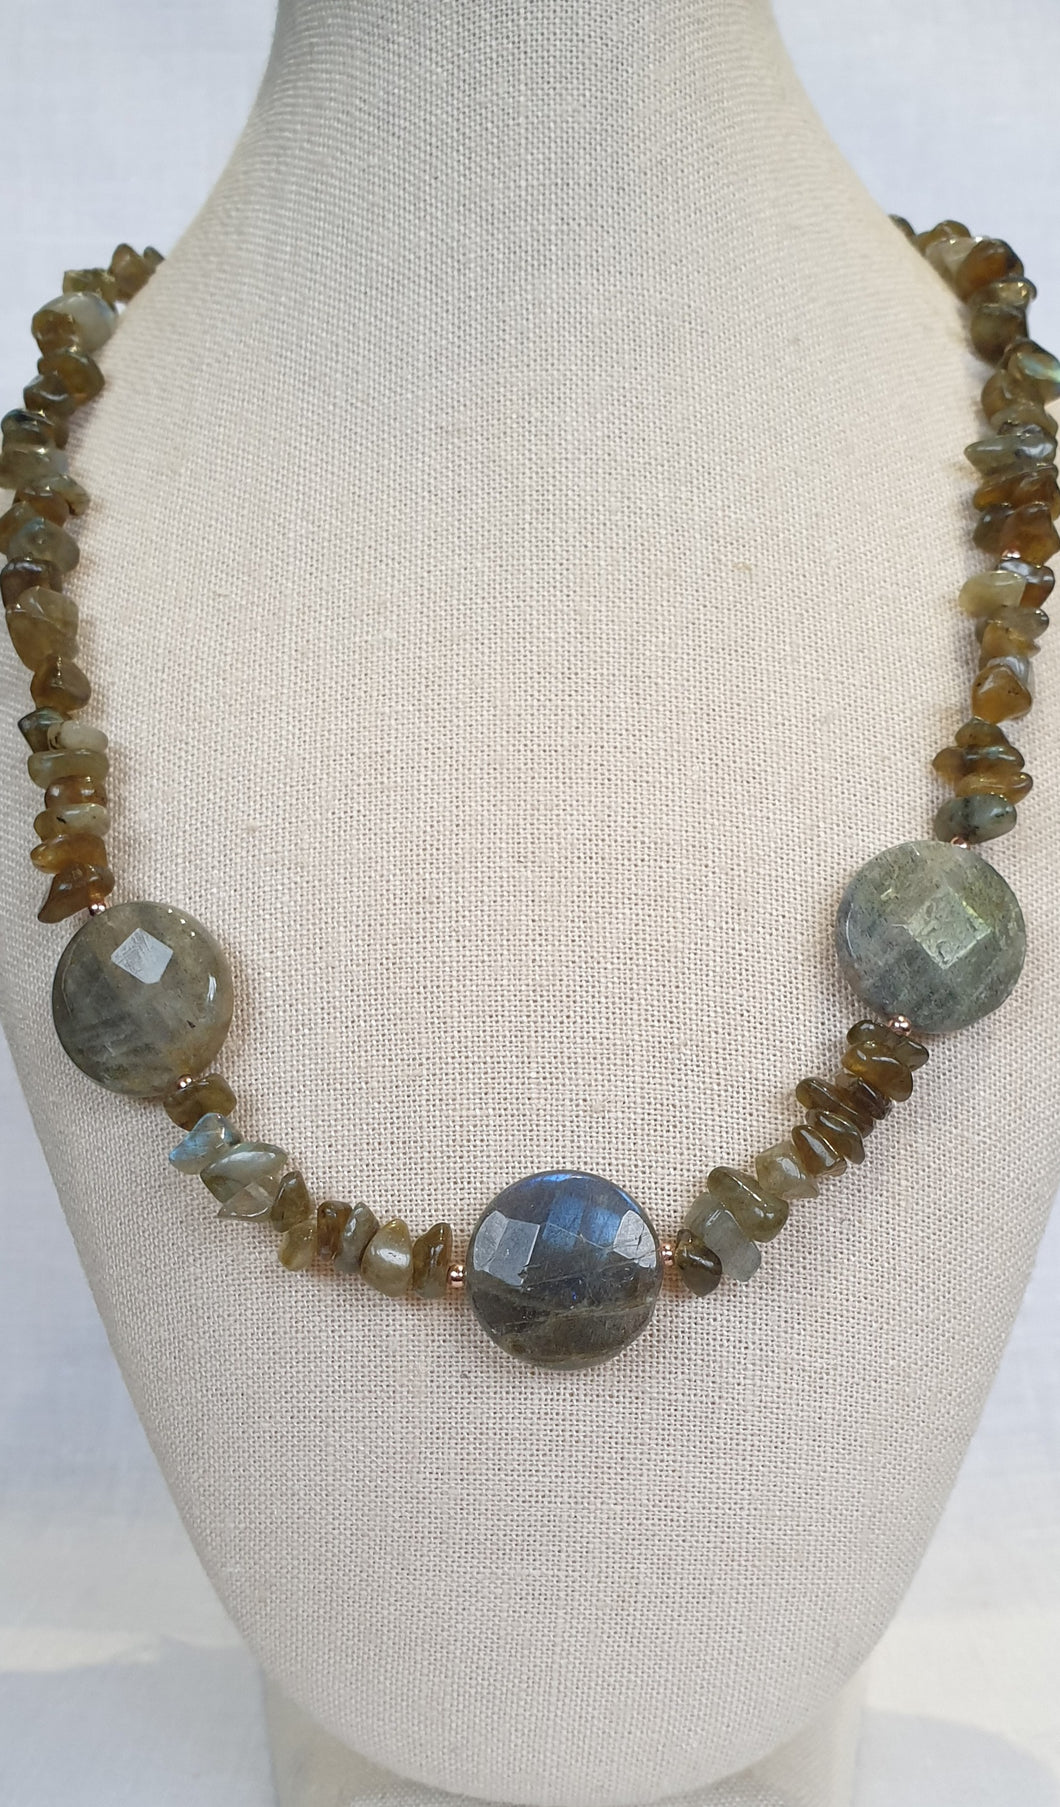 Labrodite necklace